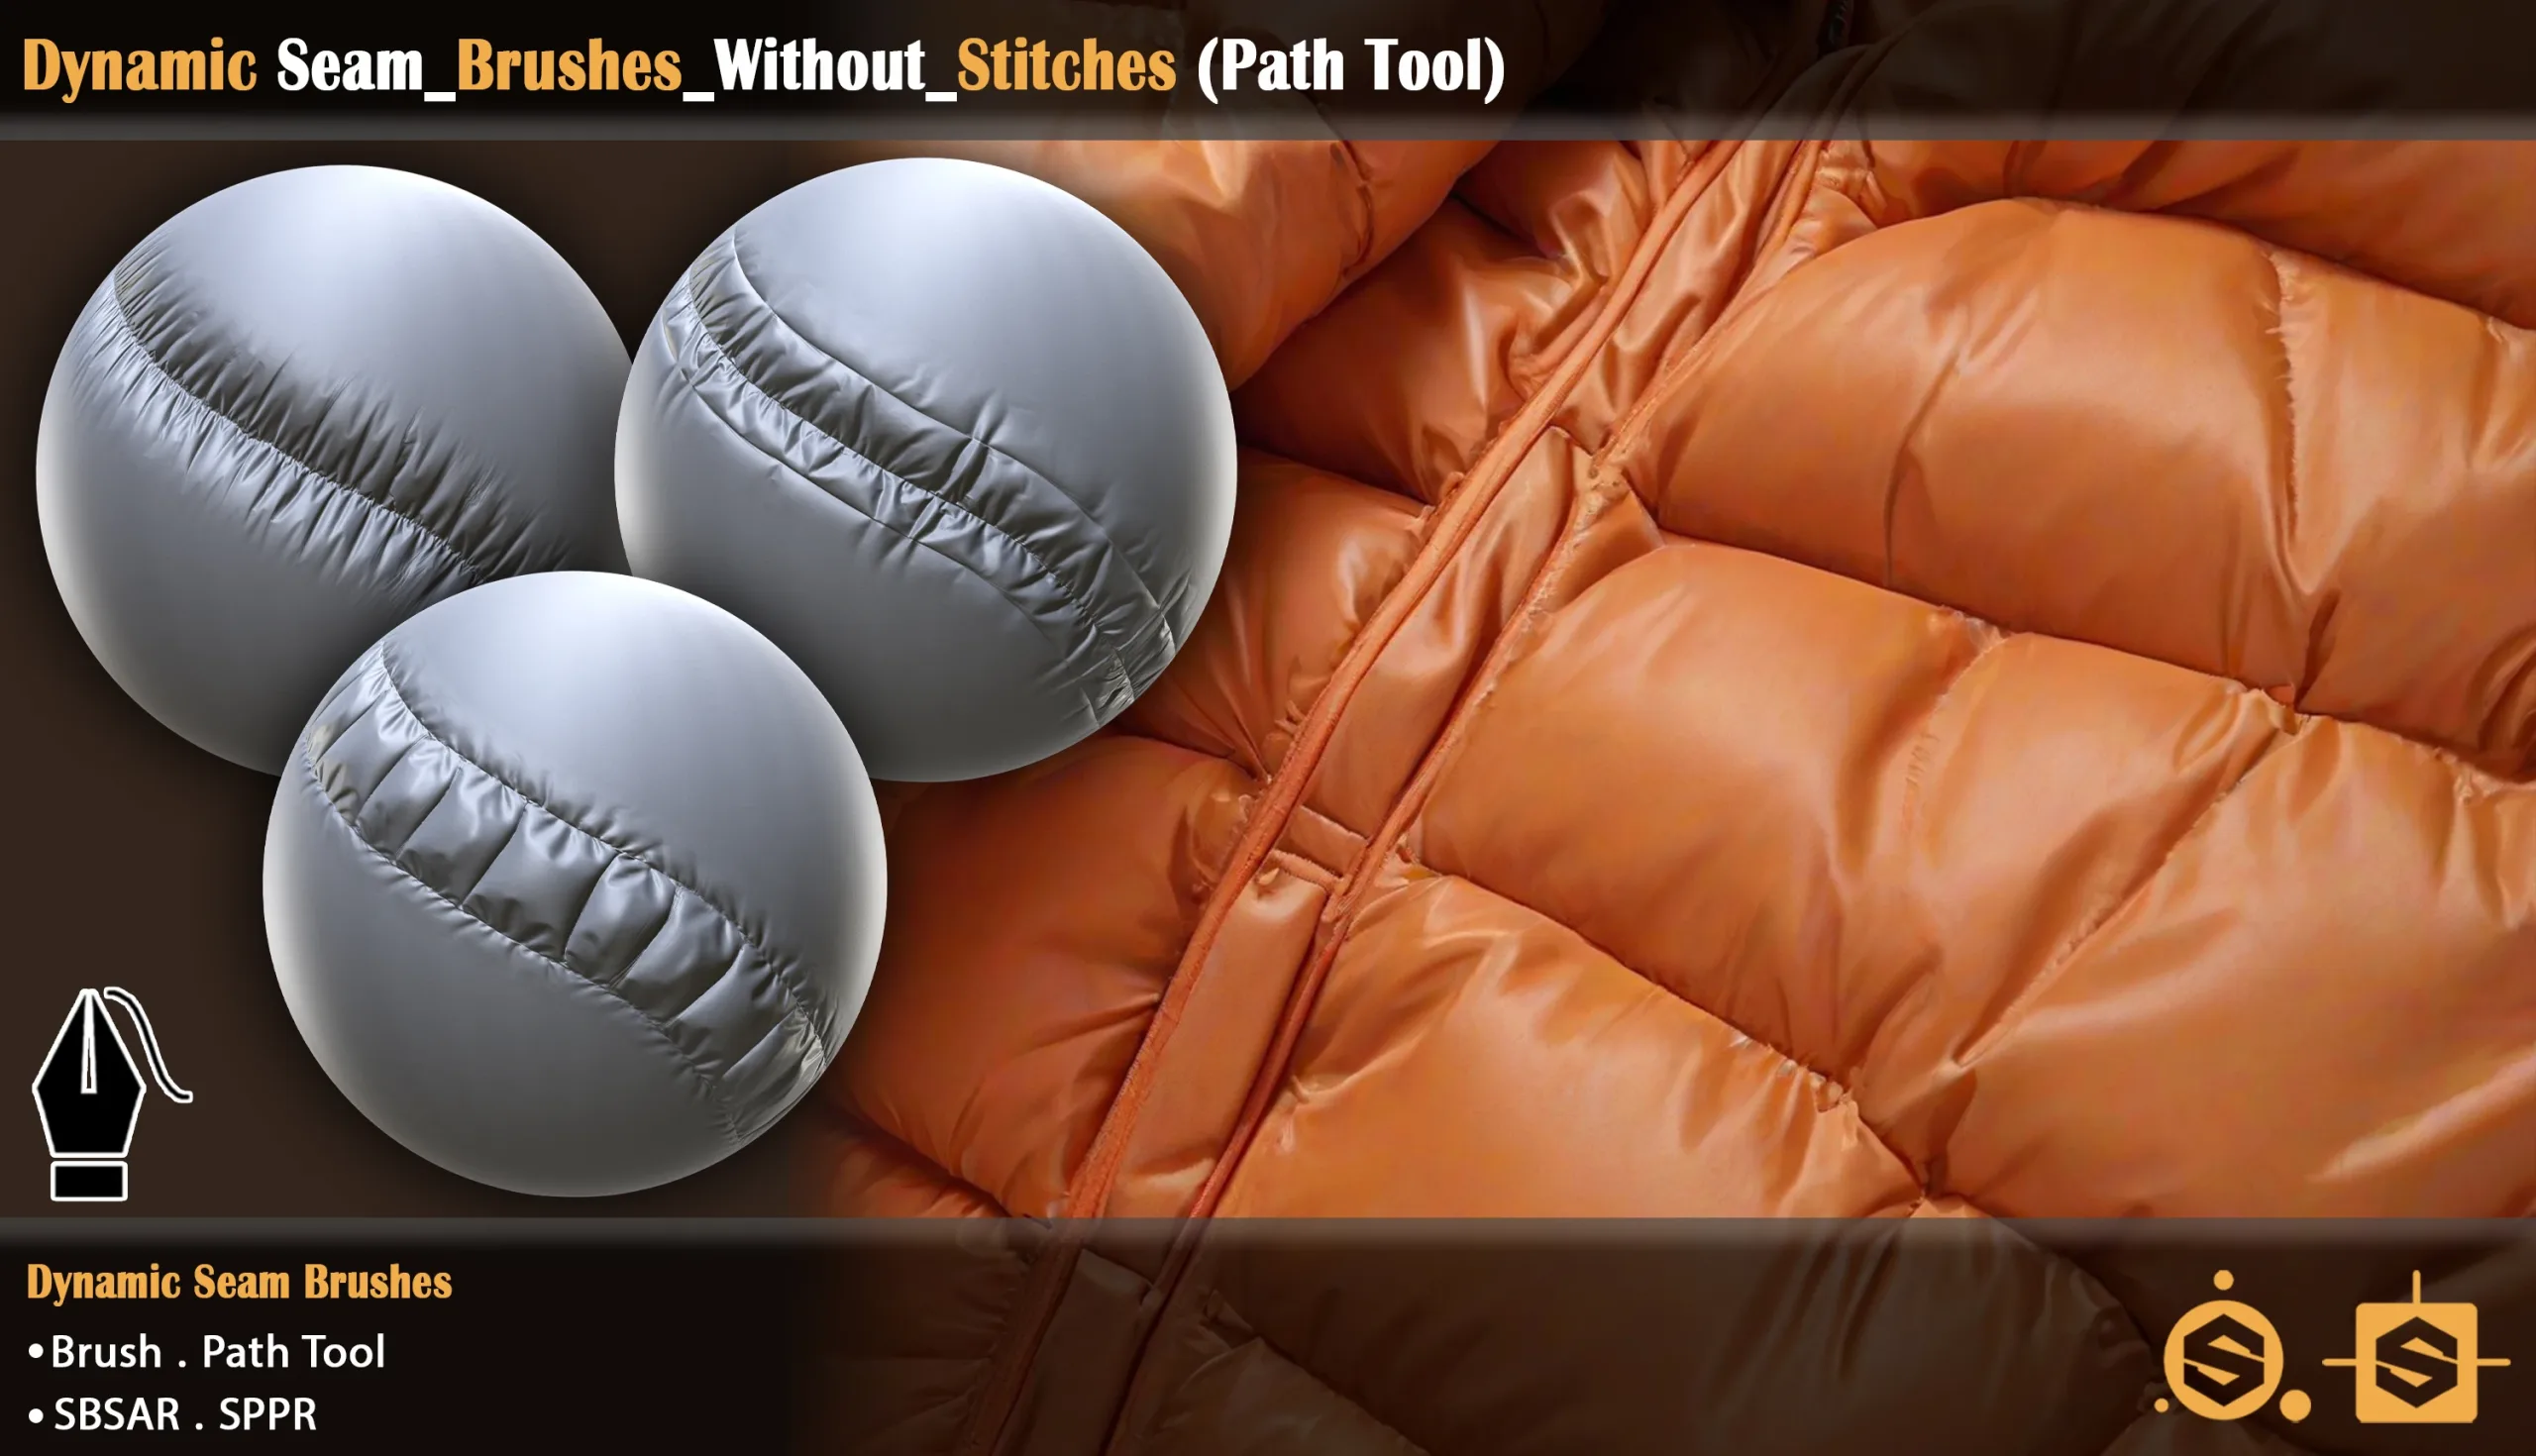 Dynamic Seam_Brushes_Without_Stitches (Path Tool)-Vol4